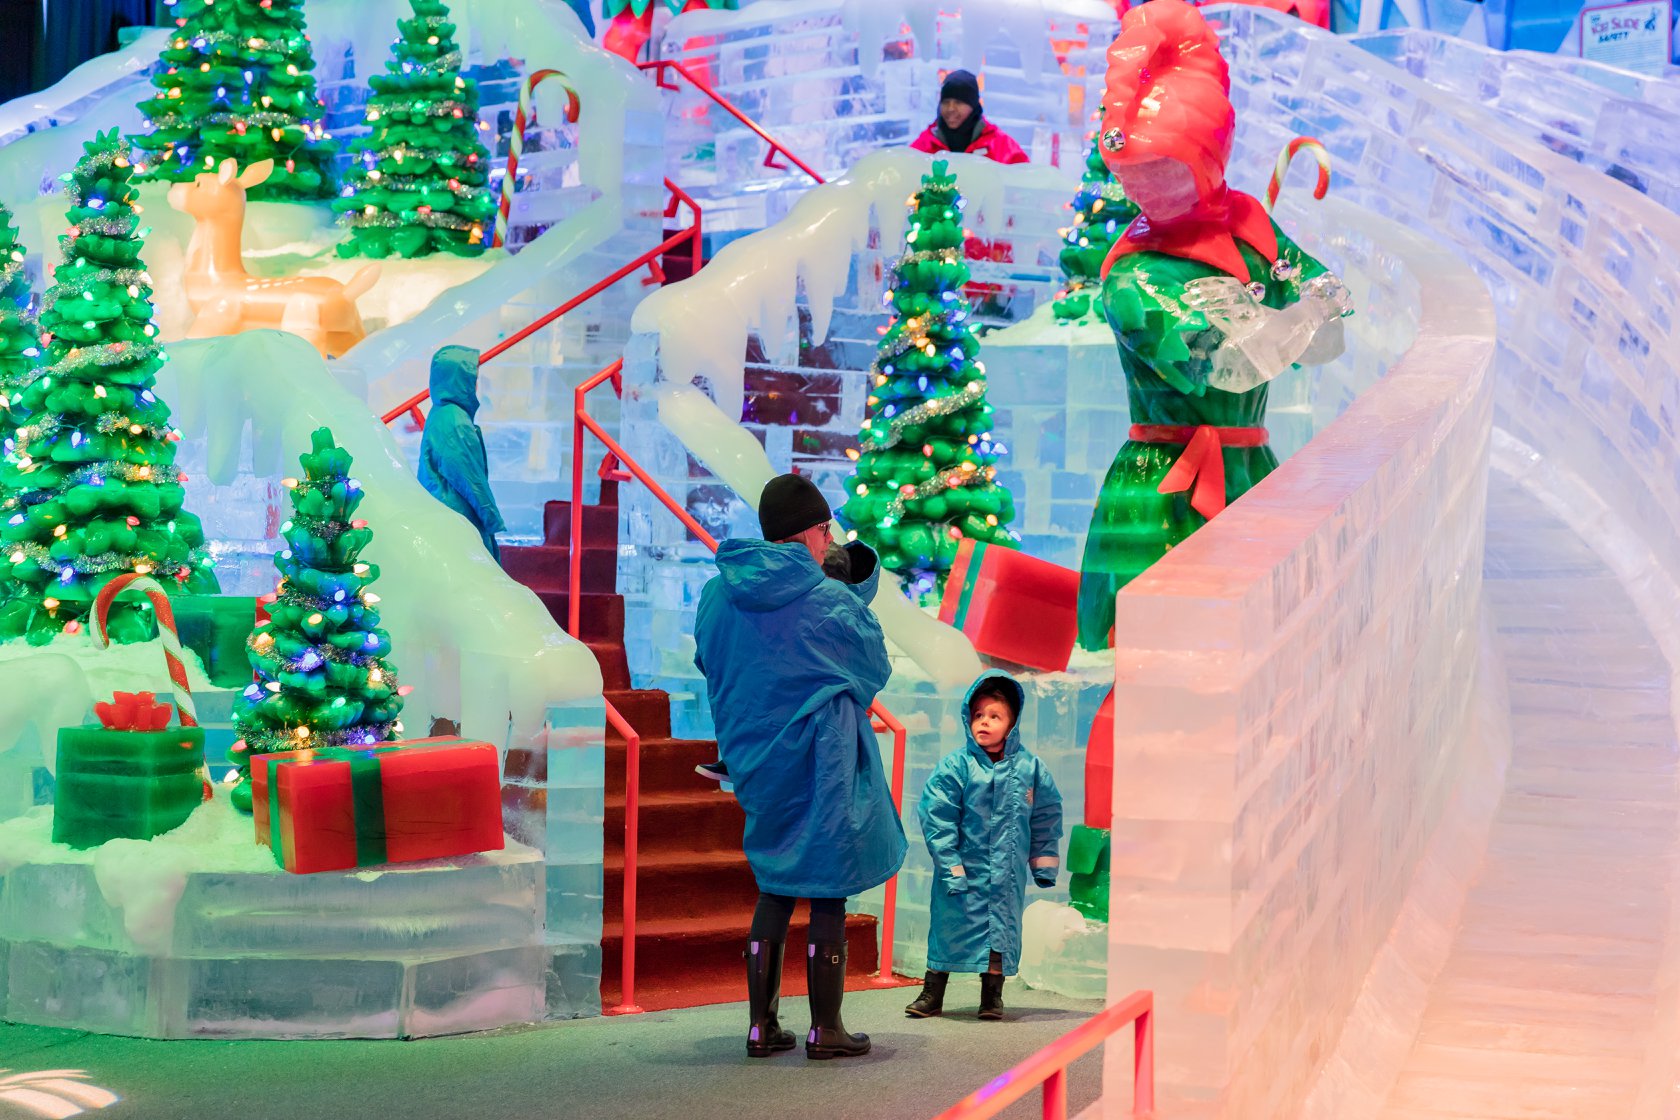 Gift Guide Tickets to Gaylor Palms ICE Everything you should know before going to ICE at Gaylord Palms!!! ICE! 2018 A Christmas Story Where to see Snow in Florida #gaylordpalmsice #icegaylord #gaylordpalms